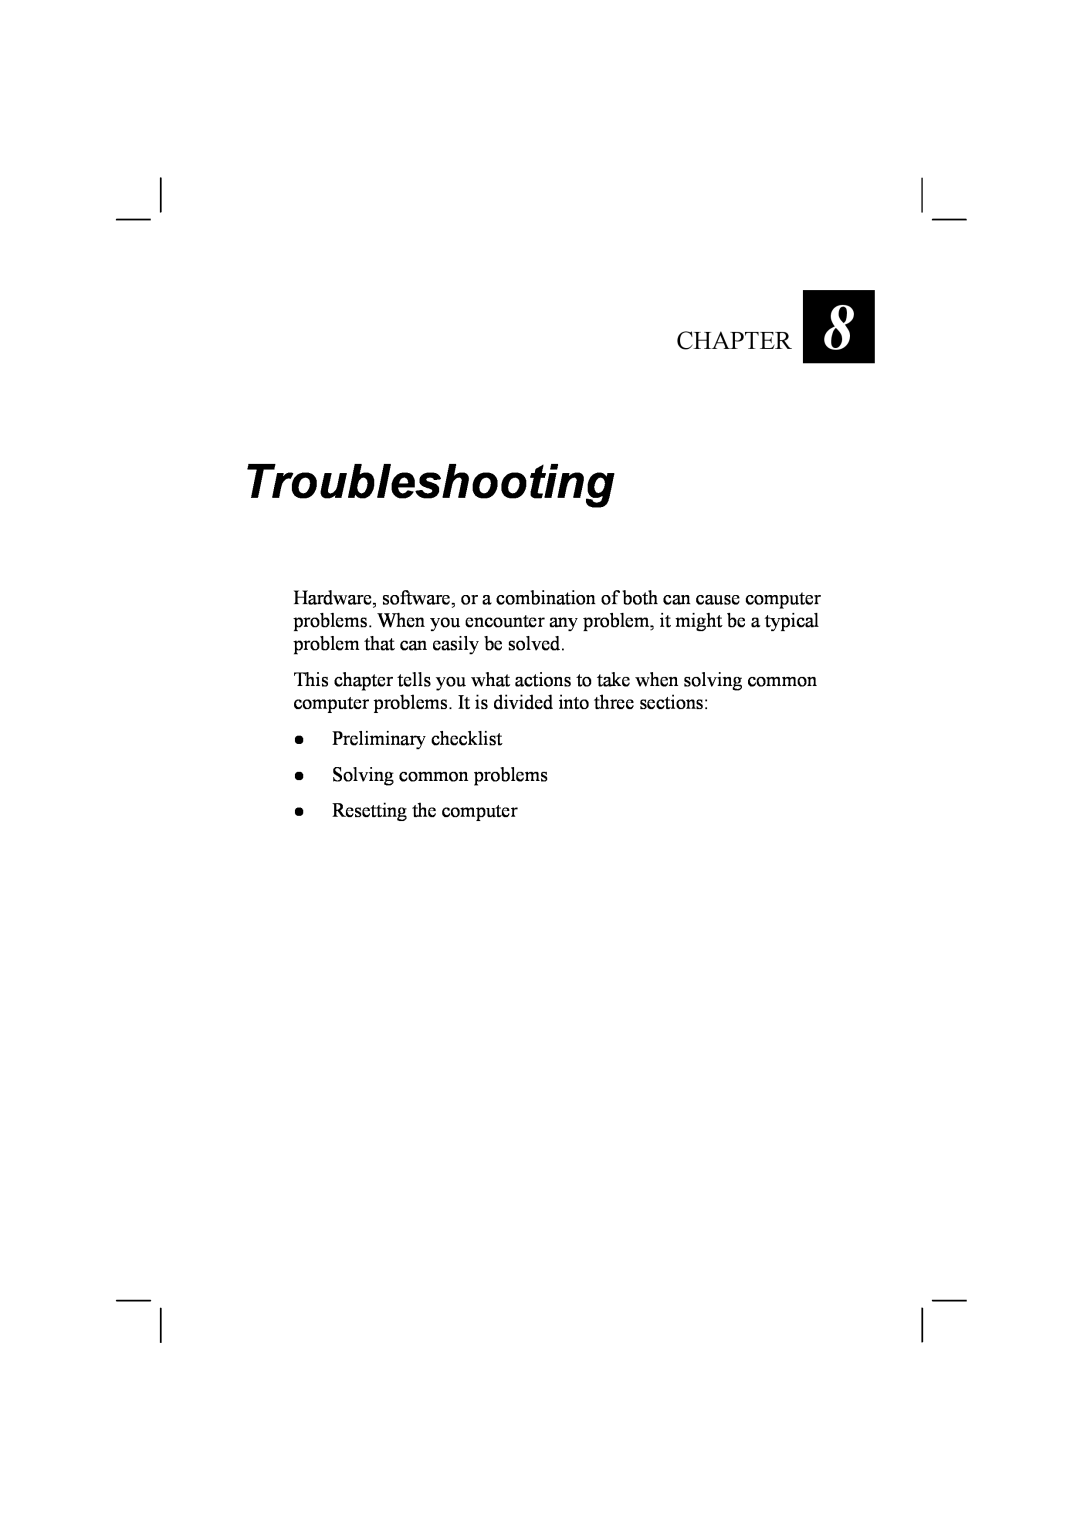 TAG 10 manual Troubleshooting, Chapter 